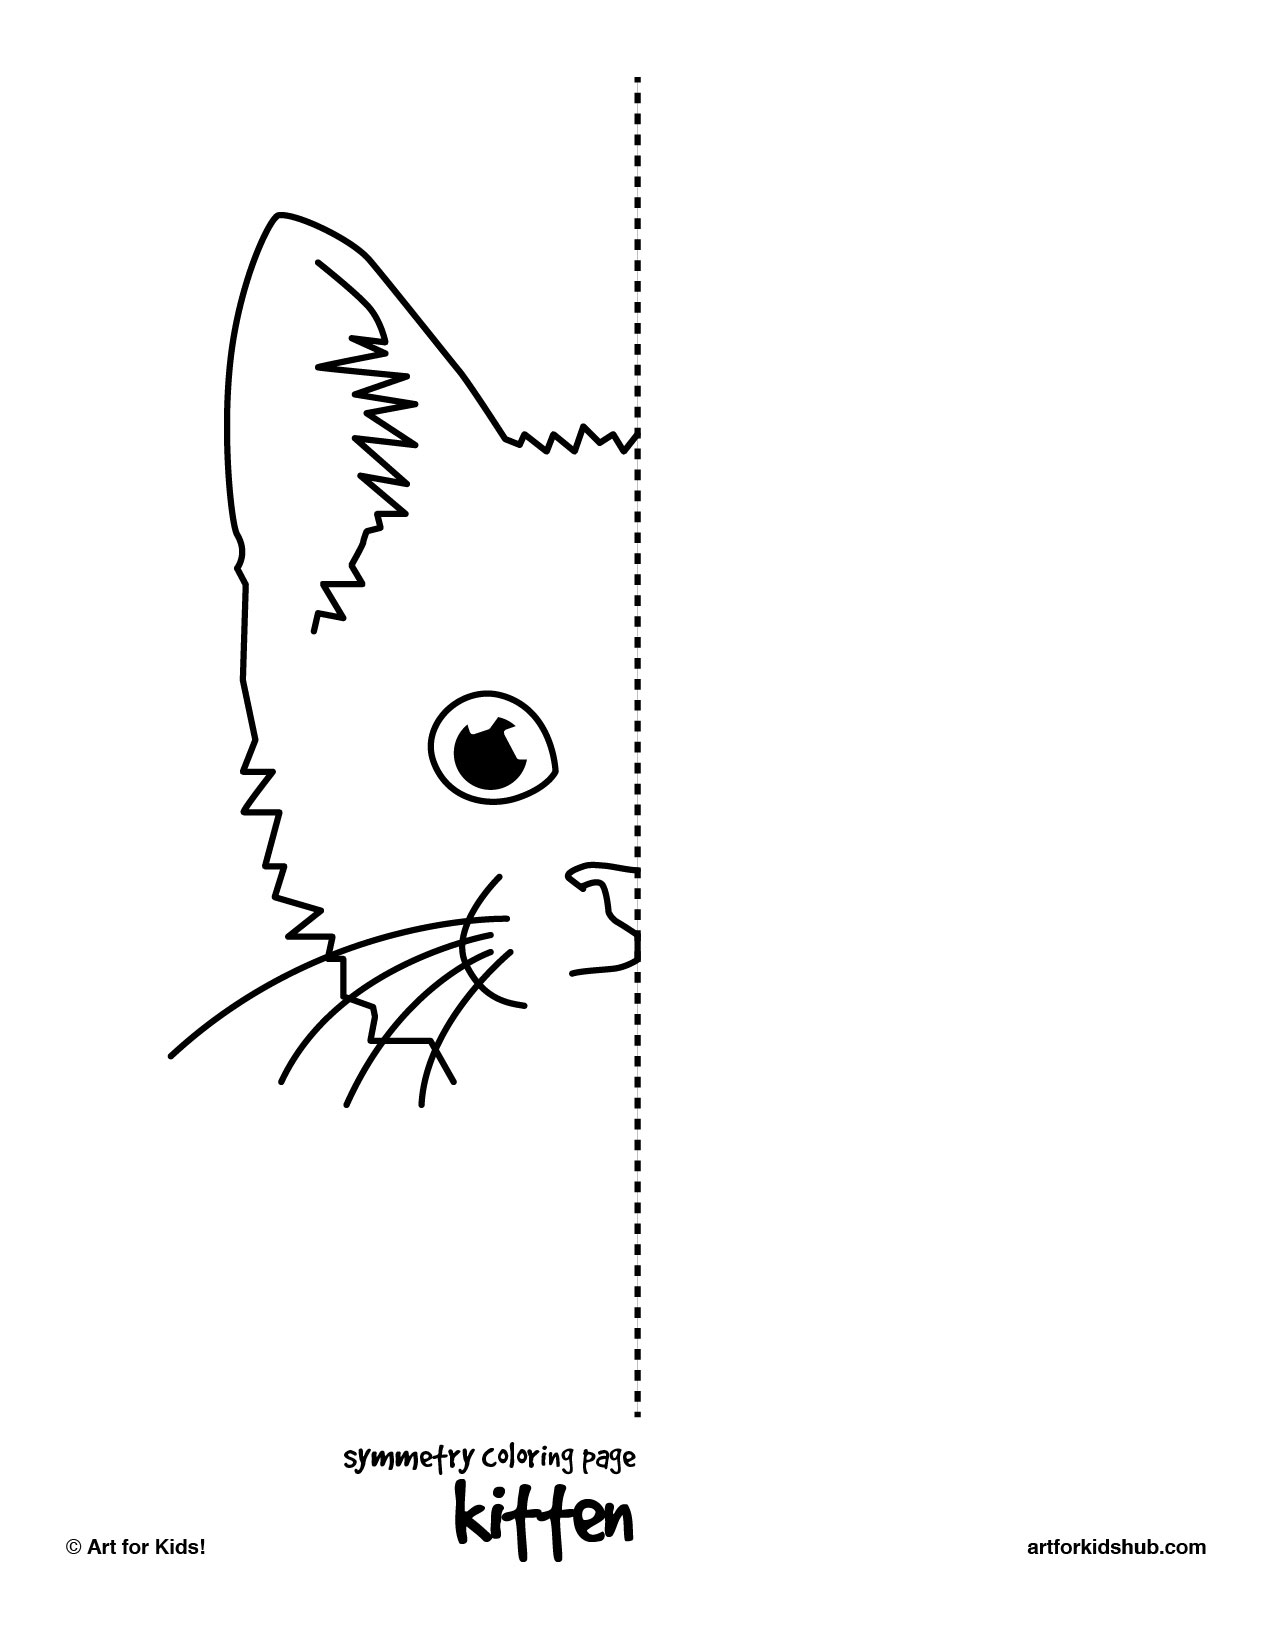 Symmetry Coloring Pages Image